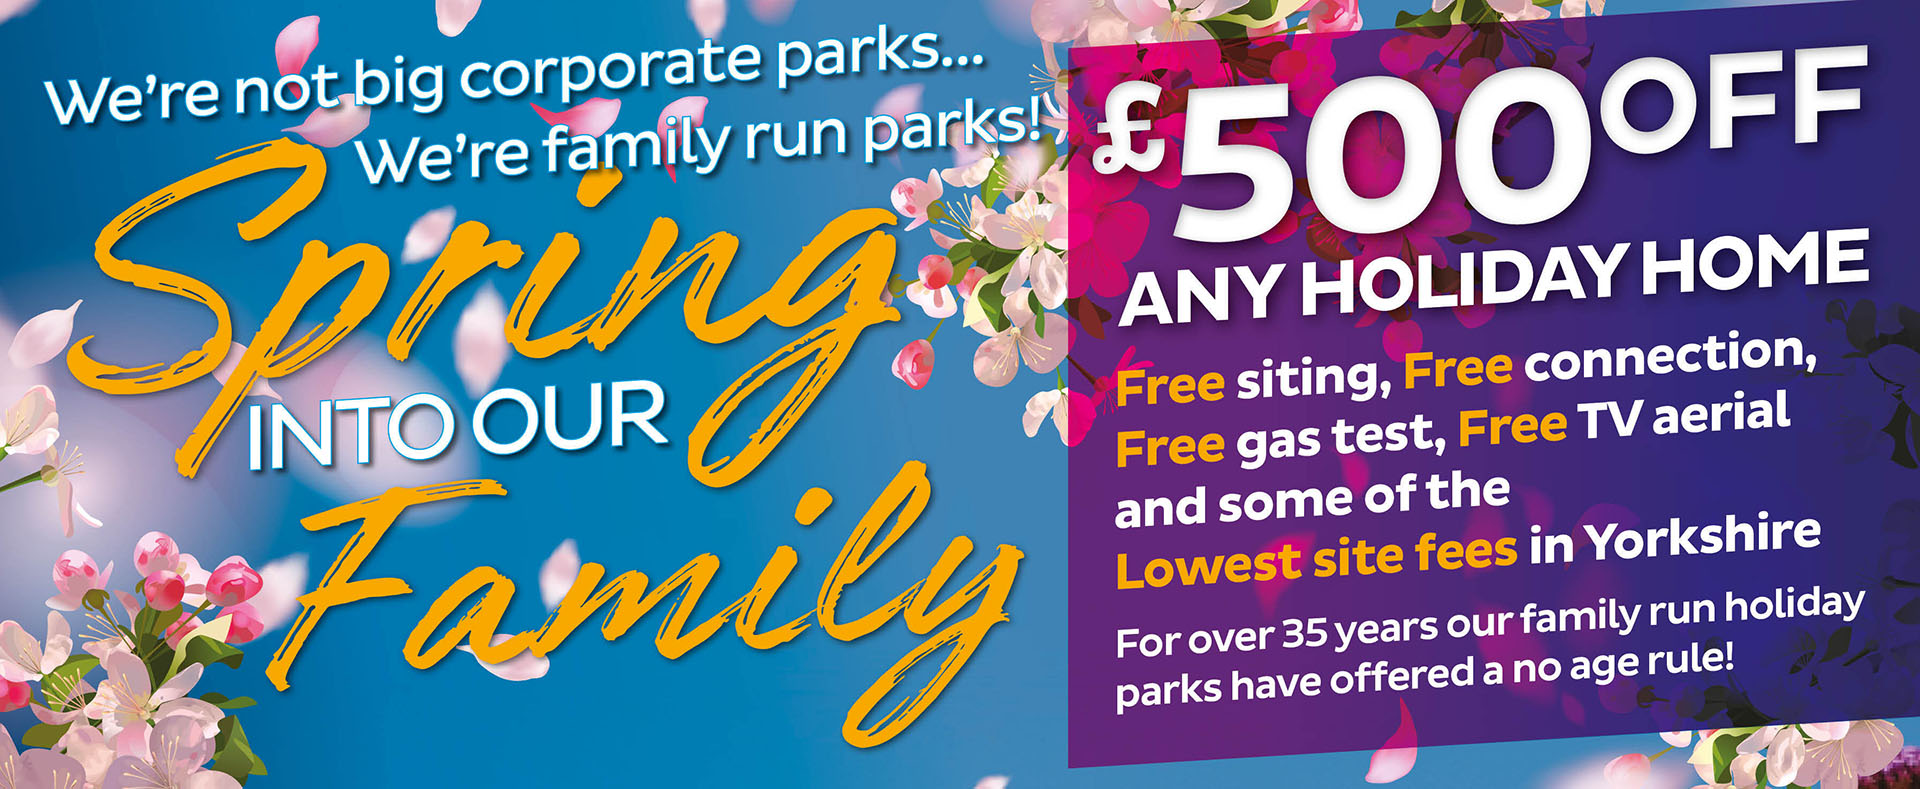 We're not big corporate parks, we're family run parks. £500 off any holiday home. Free siting, free connection, free gas test, free TV aerial and some of the lowest site fees in Yorkshire.